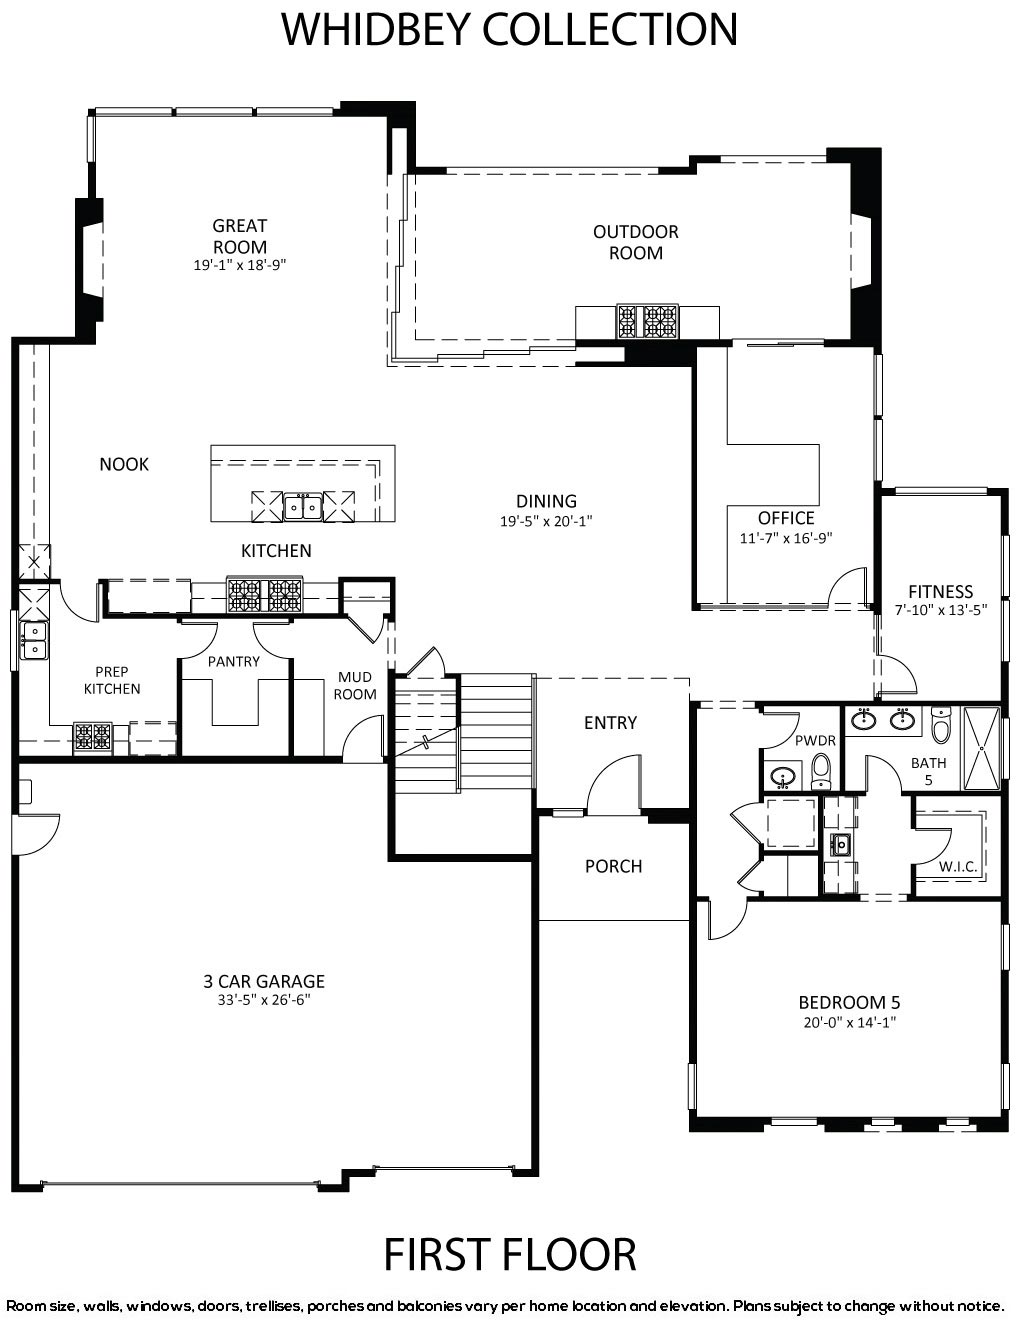 Homesite 2 Whidbey Collection First Floor